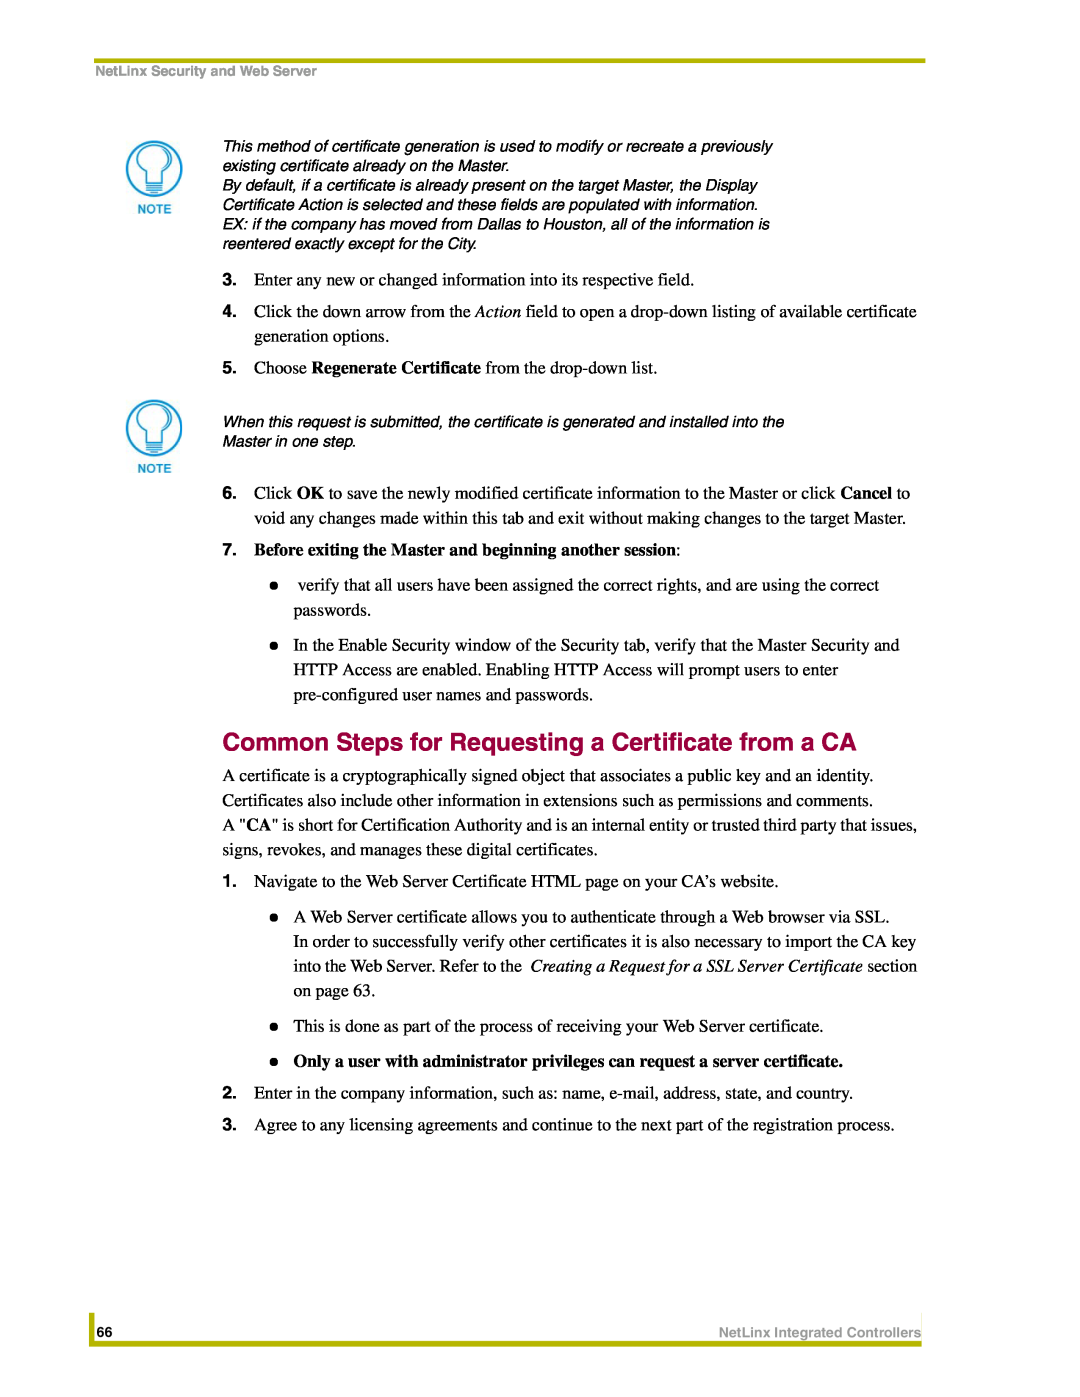 AMX NXC-ME260 Common Steps for Requesting a Certificate from a CA, Before exiting the Master and beginning another session 